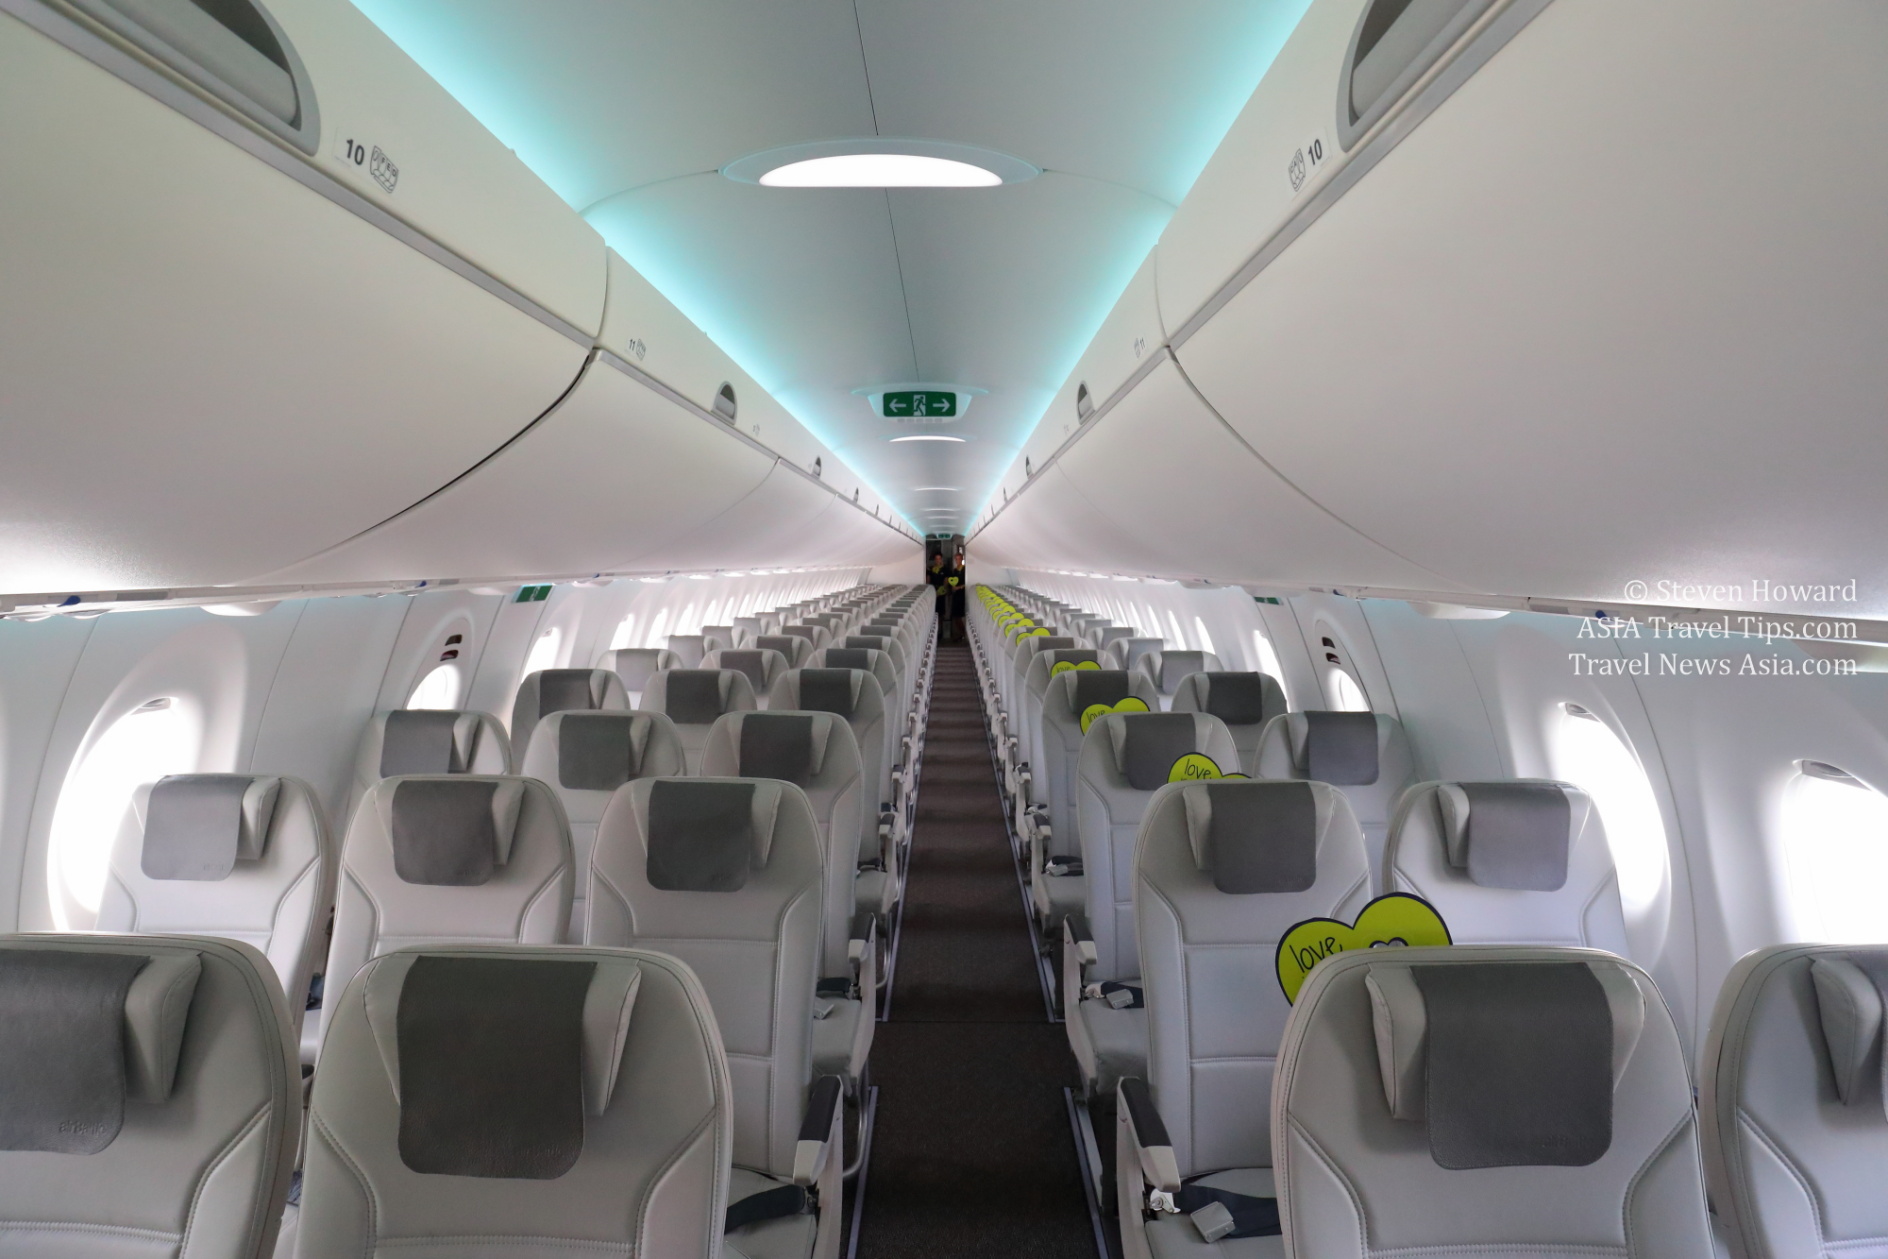 Inside an Air Baltic Airbus A220-300. Picture by Steven Howard of TravelNewsAsia.com Click to enlarge.